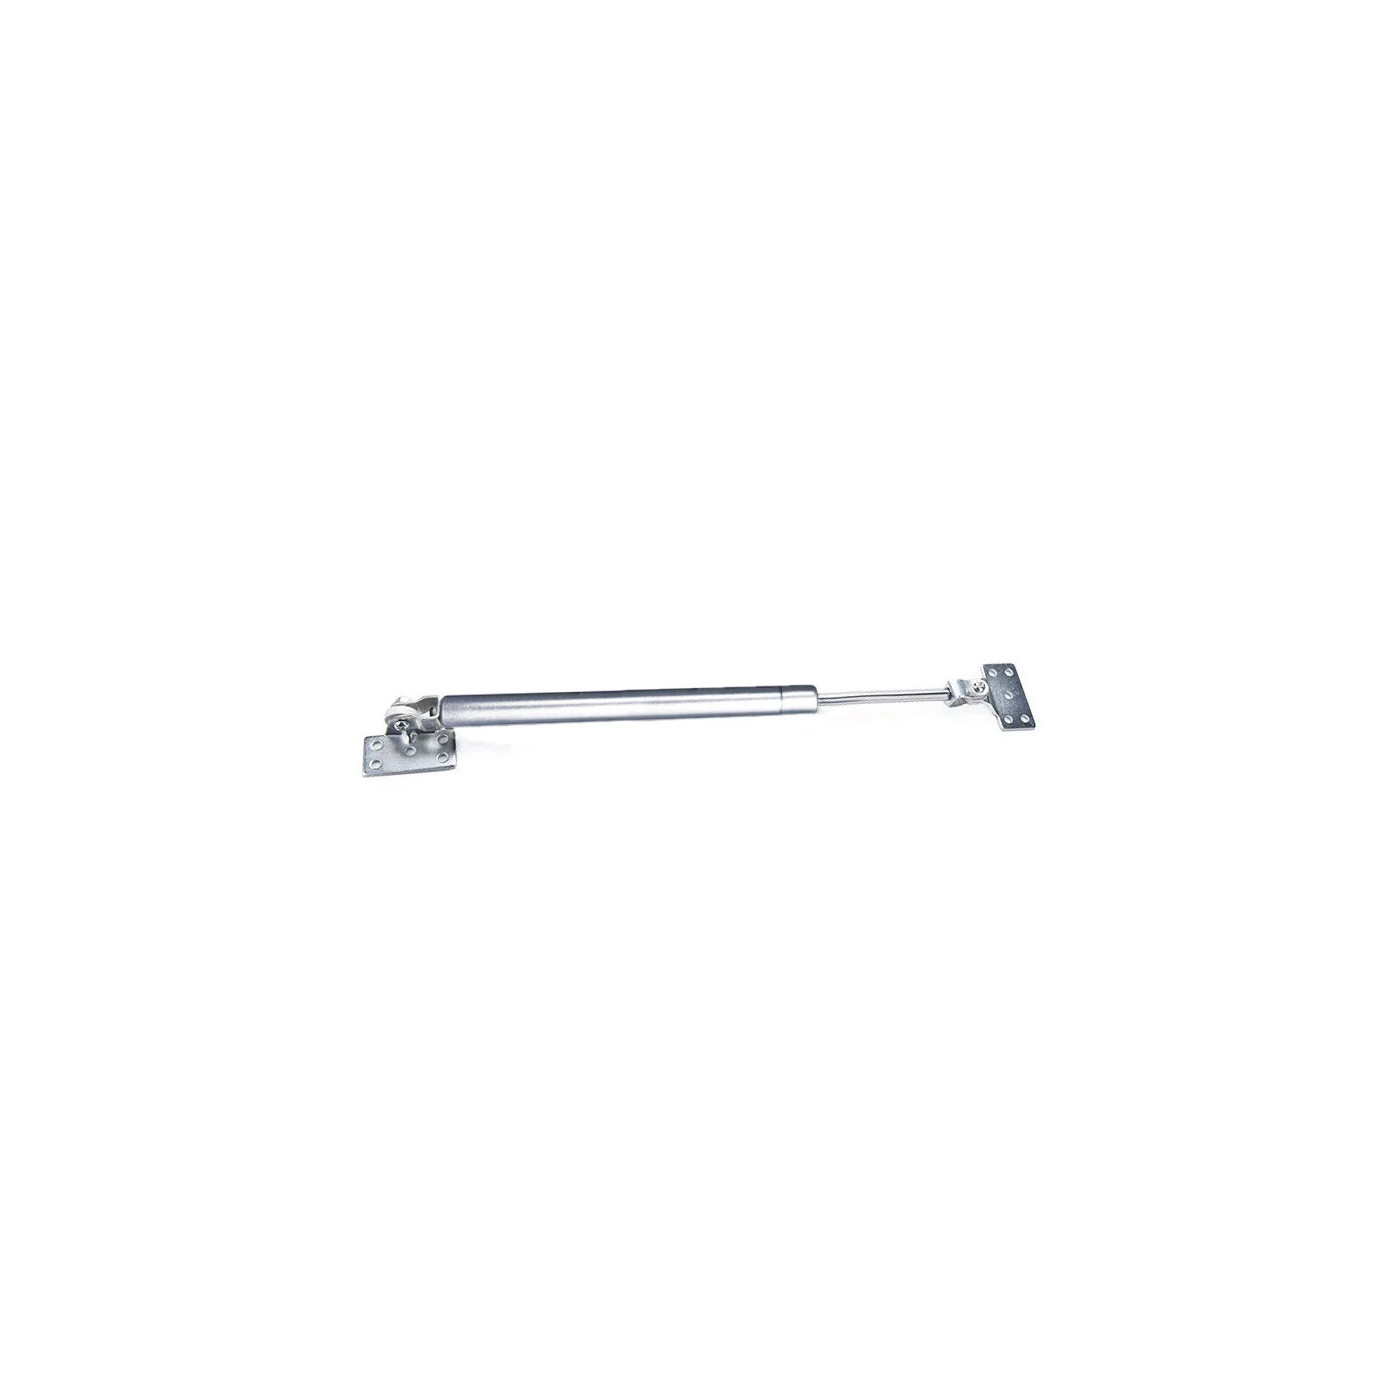 Universal gas spring with brackets (350N/35kg, 490 mm, silver)